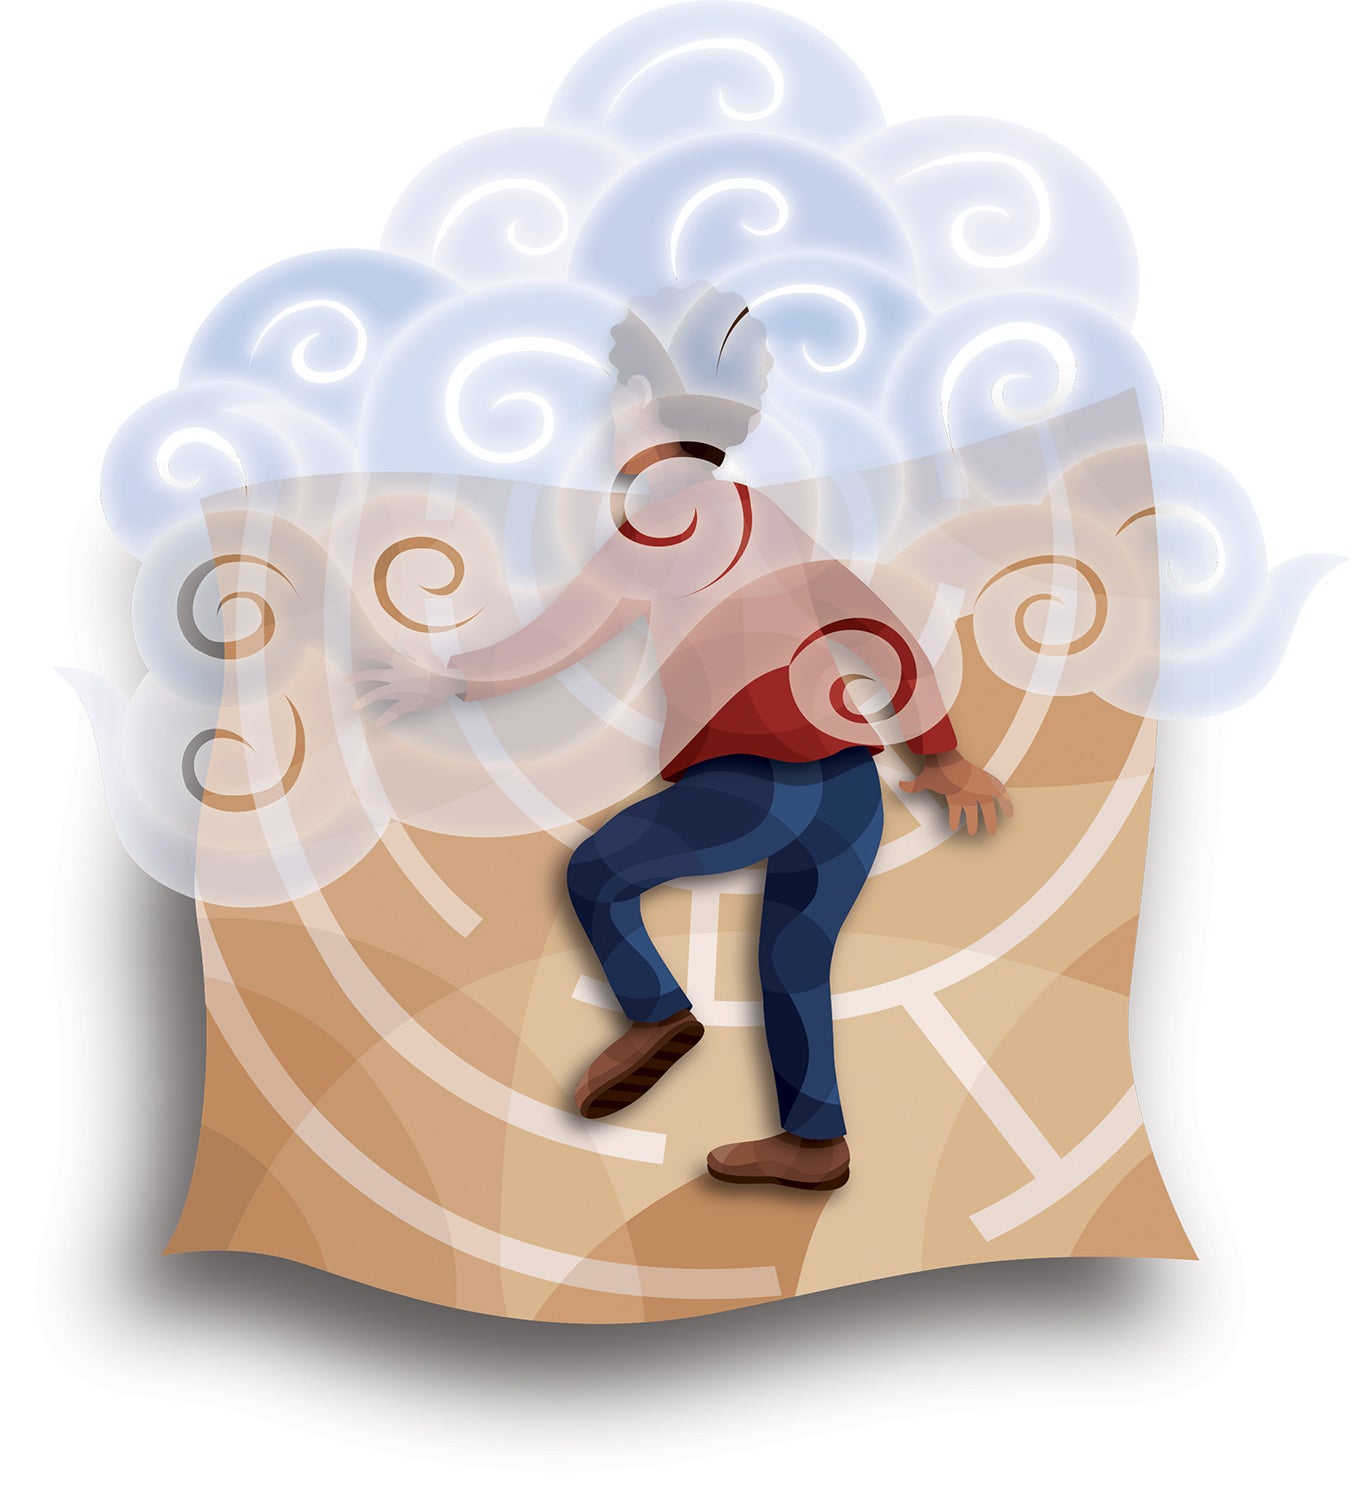 Illustration of person walking into foggy maze